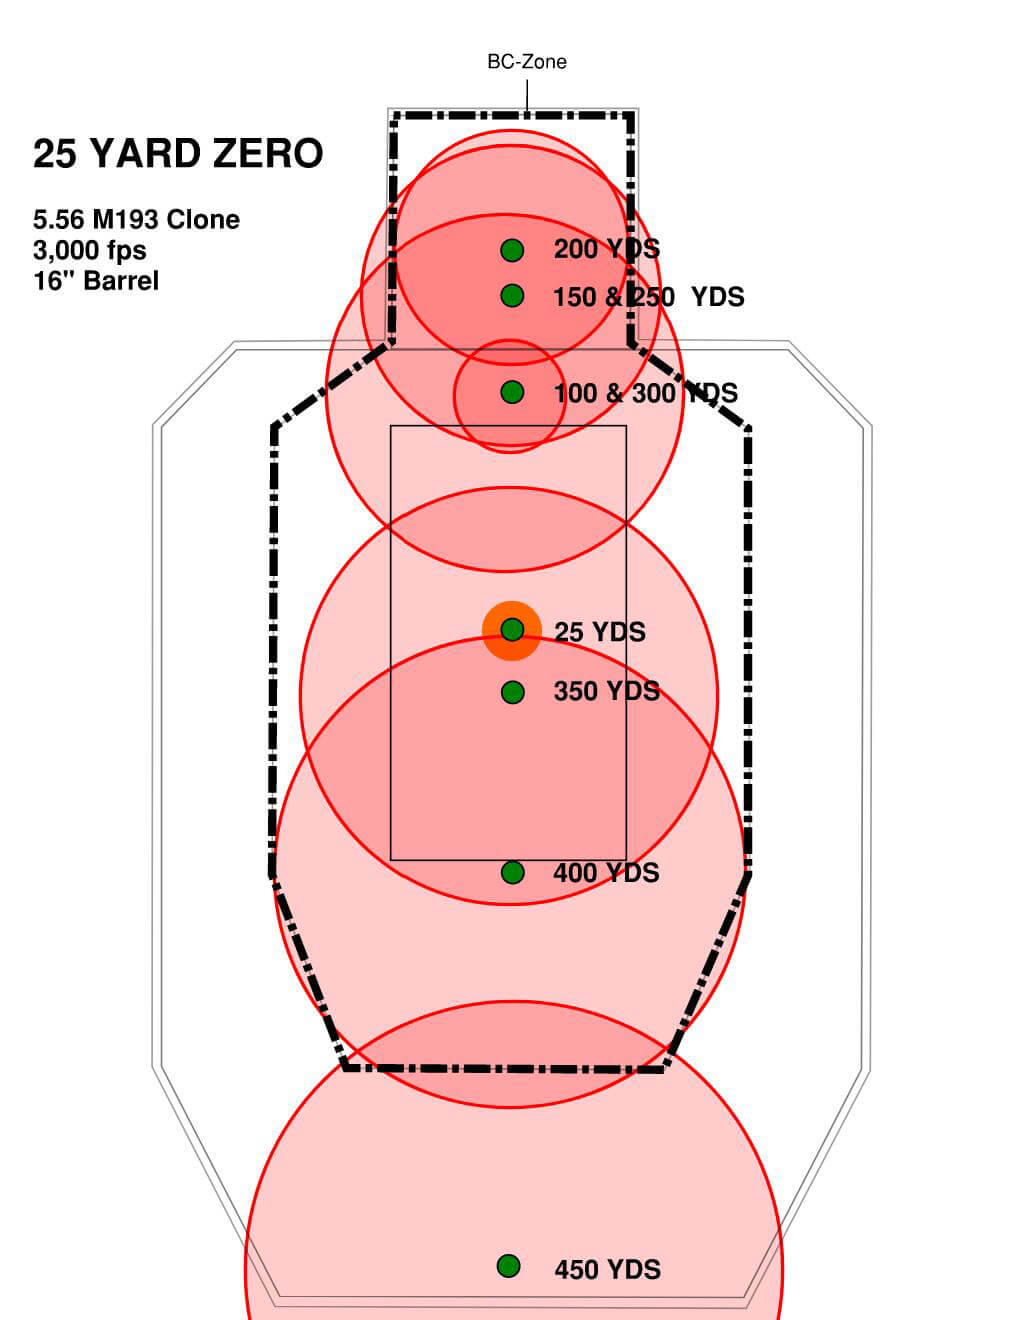 Shown is a target used for helping you in zeroing your carbine at 25 yards. When outfitting your carbine, you might like a red dot instead of a magnified optic. Even so, you should take the time to properly zero your sights. Bullet drop isn't terribly important as much as understanding holdover when determining the deviation between aim and impact because of the height over bore.